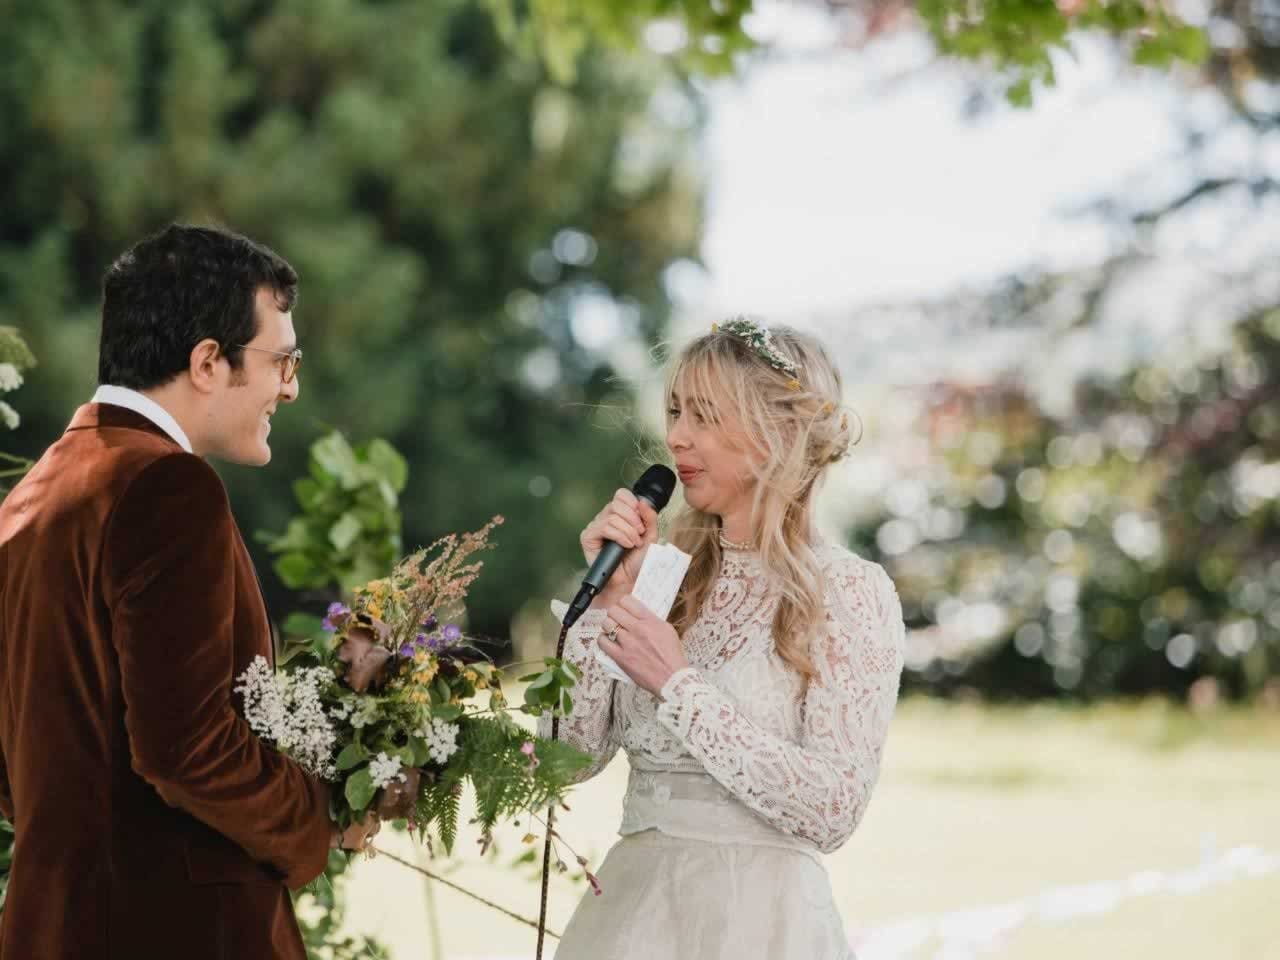 Setting the Scene: Gorgeous Ideas for Your Outdoor Vow Renewal Ceremony